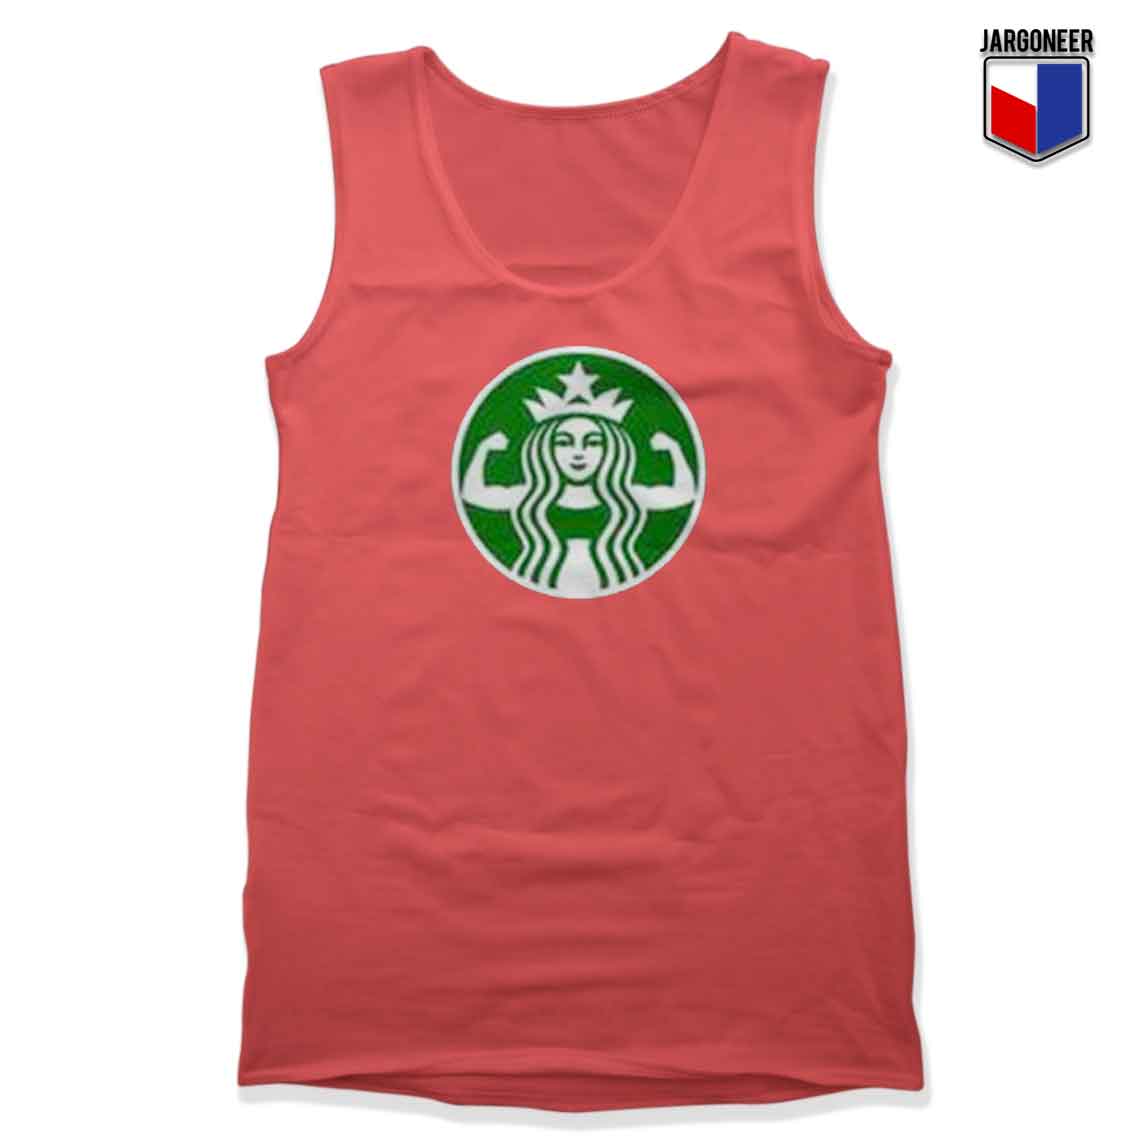 Starbuff Strong Starbucks - Shop Unique Graphic Cool Shirt Designs